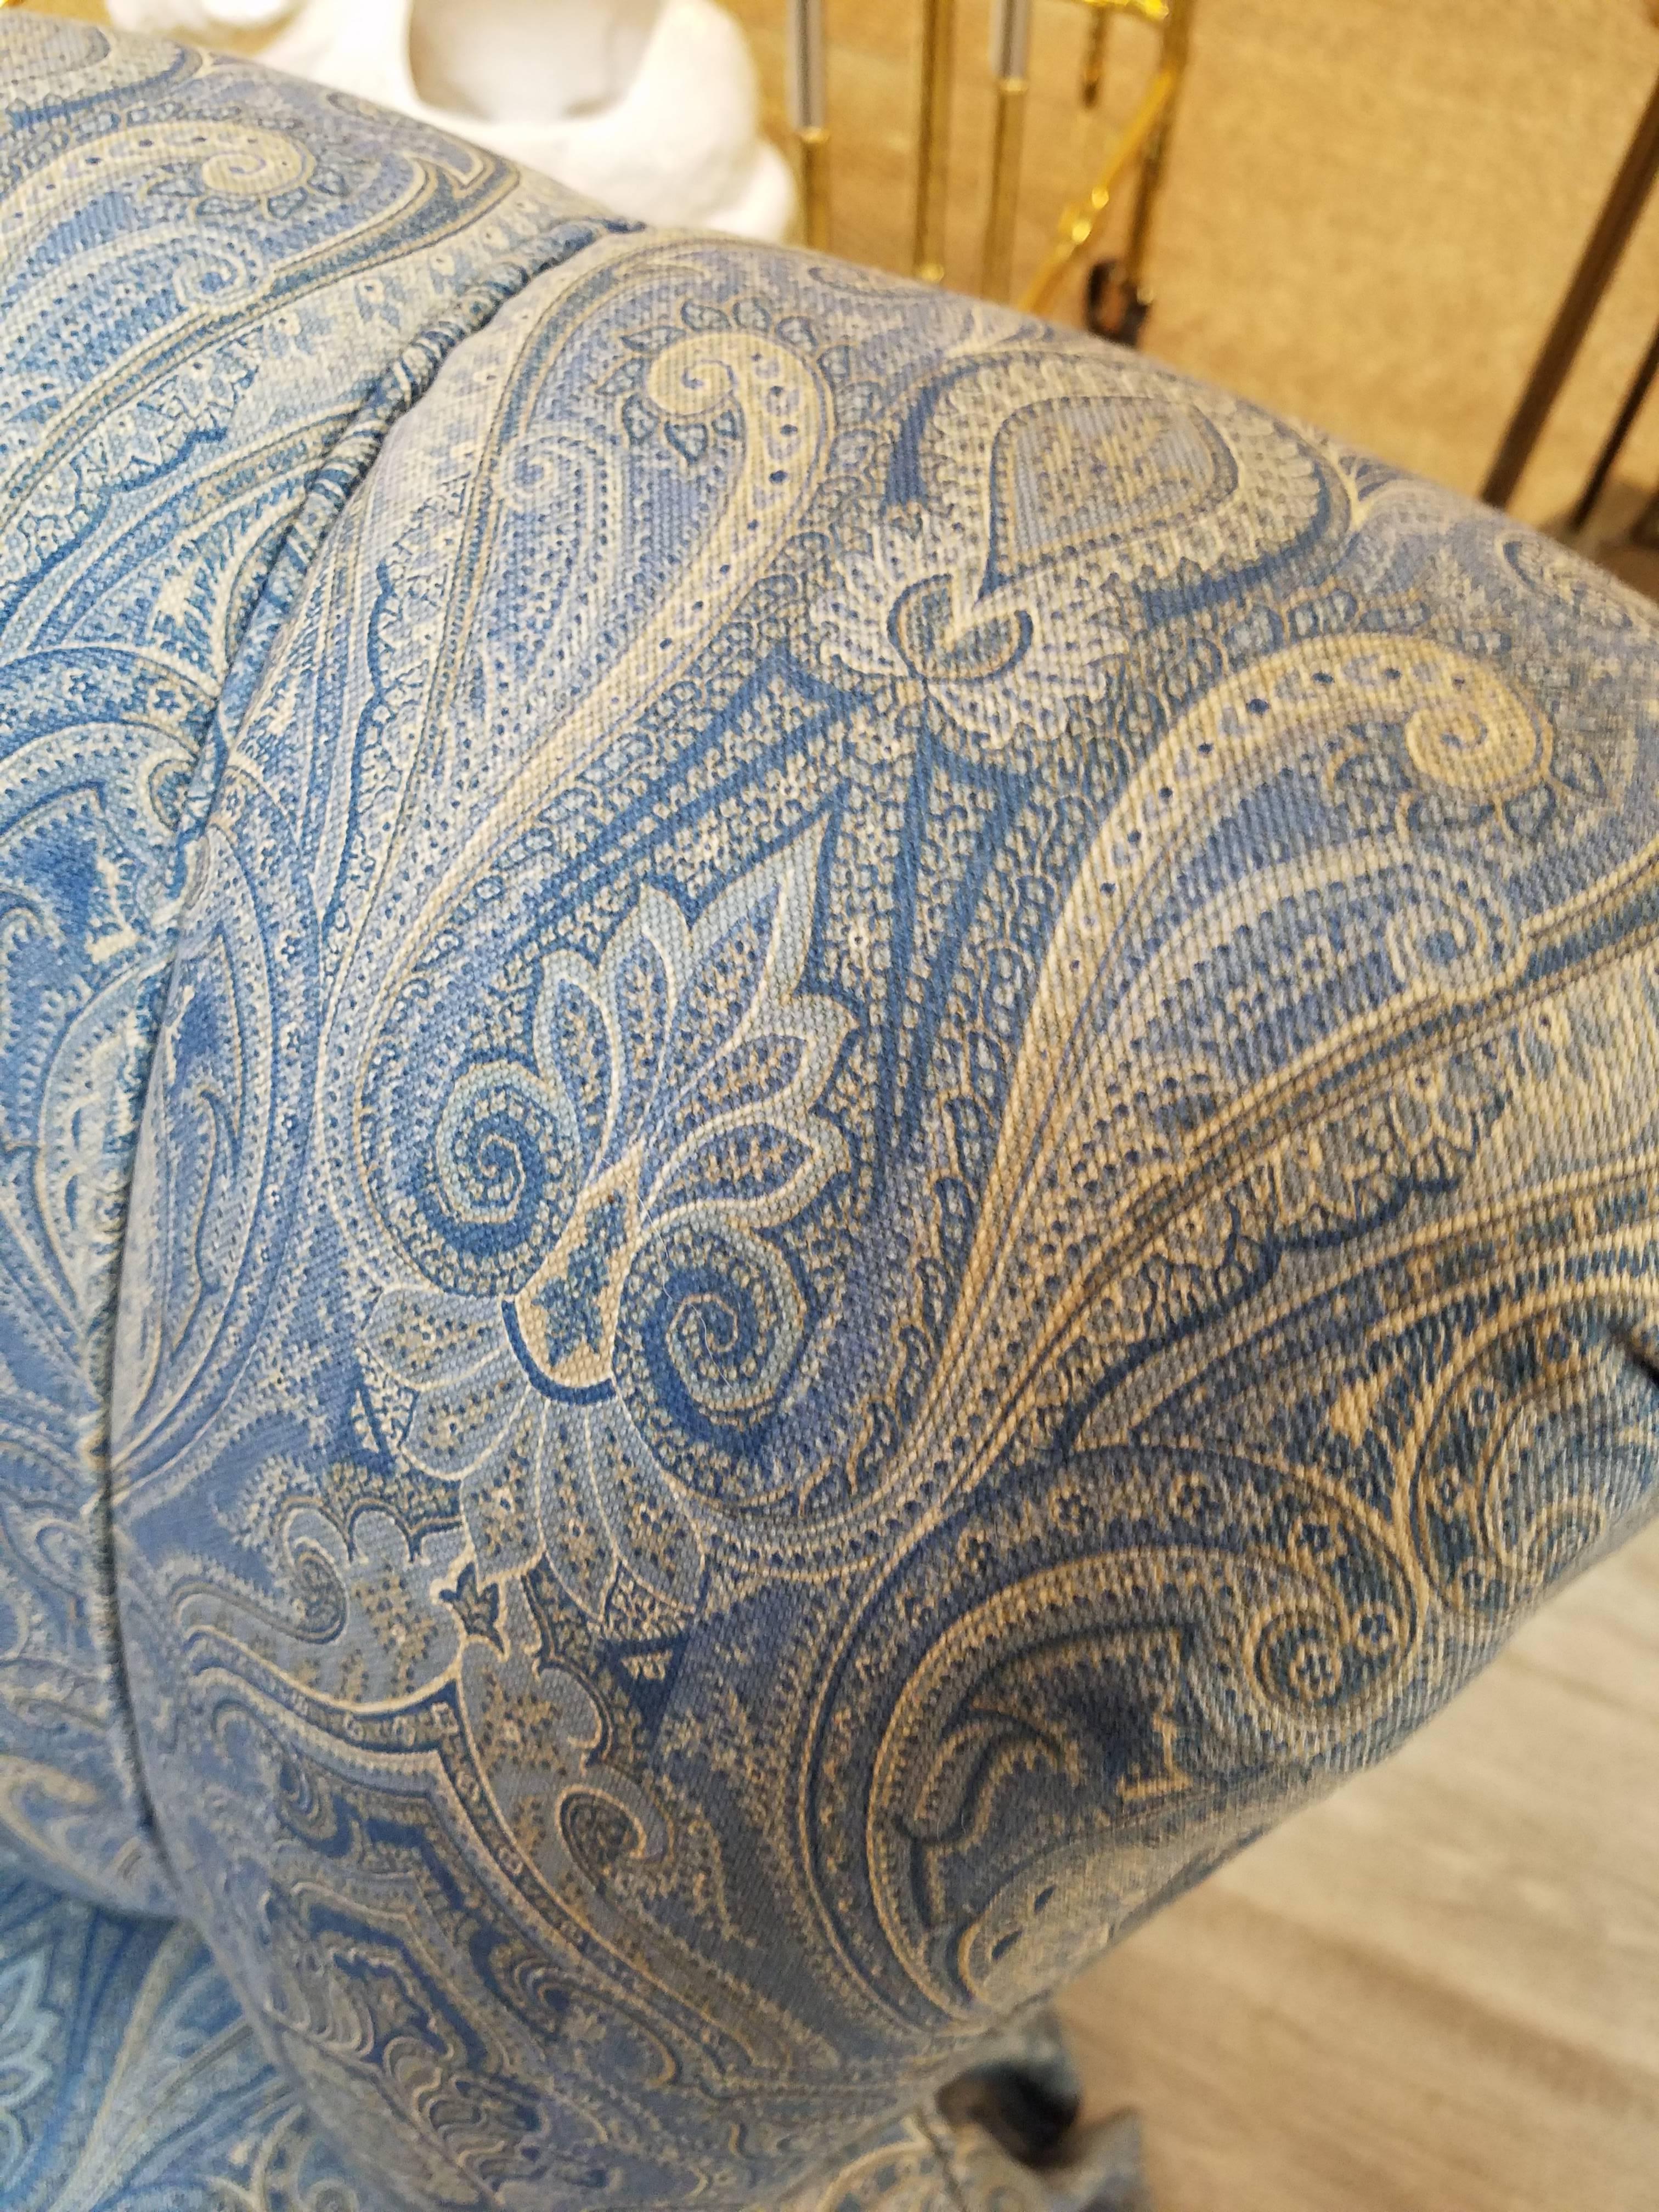 paisley upholstered chairs